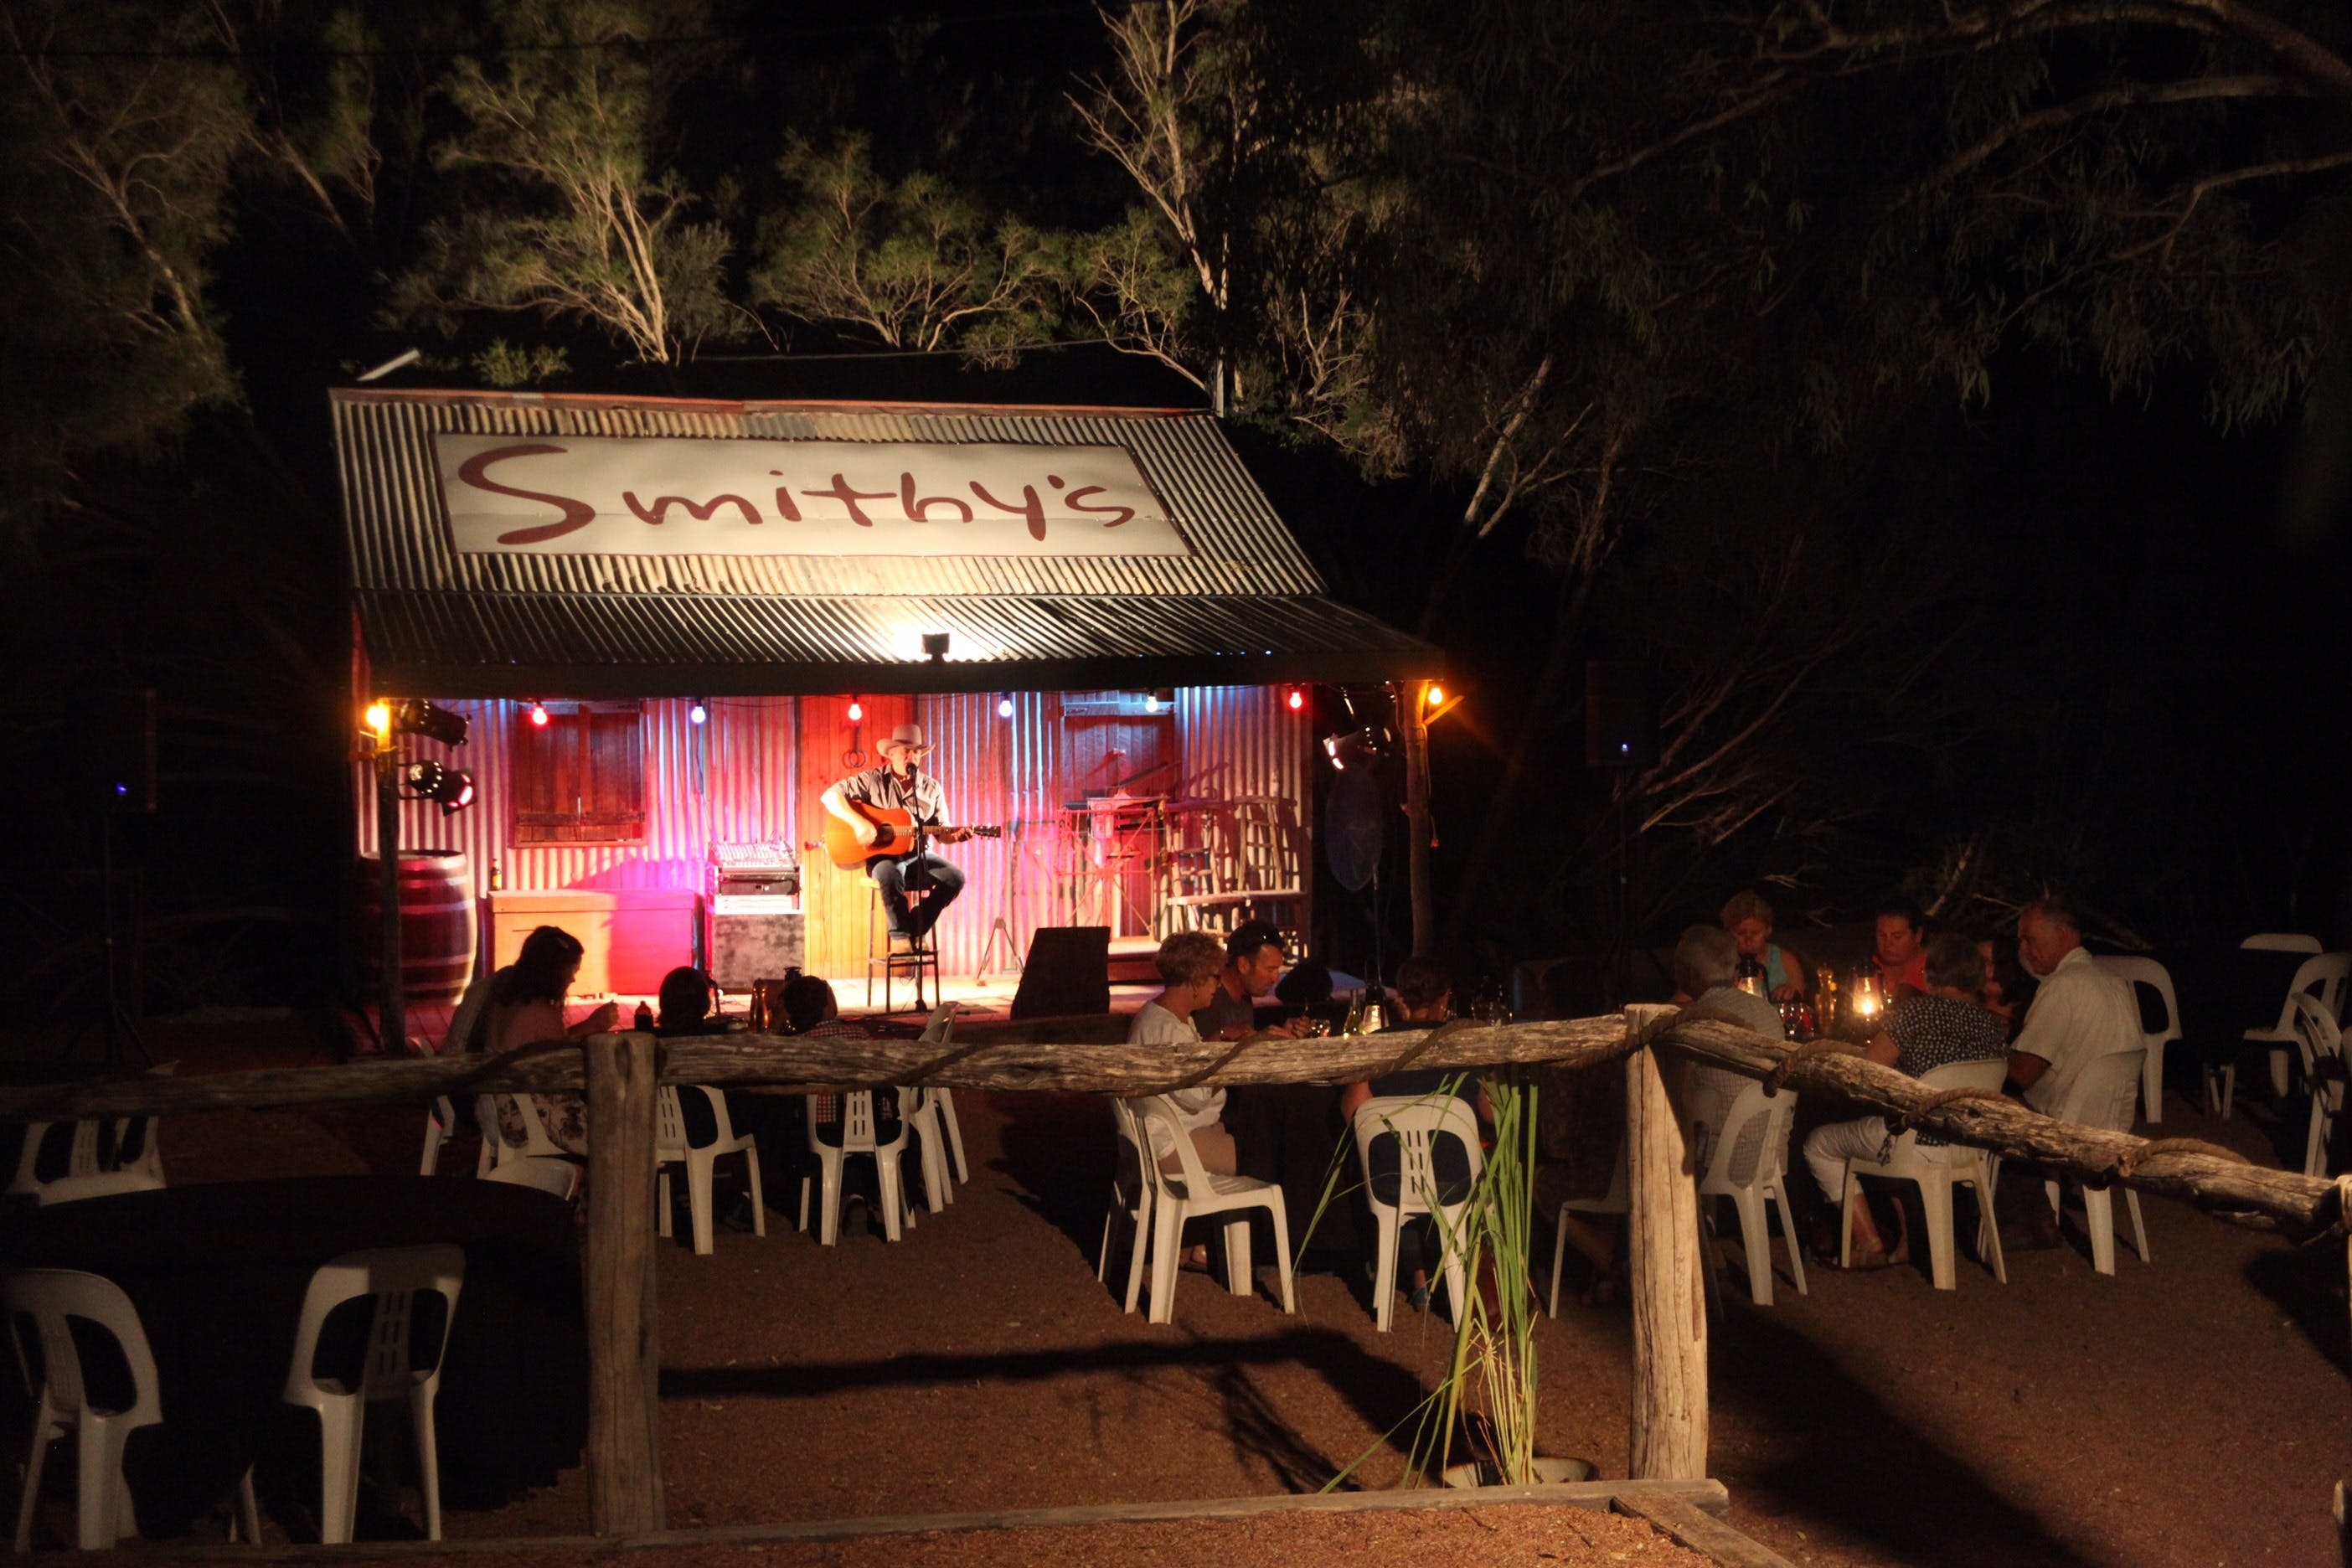 Smithy's Outback Dinner and Show - Redcliffe Tourism